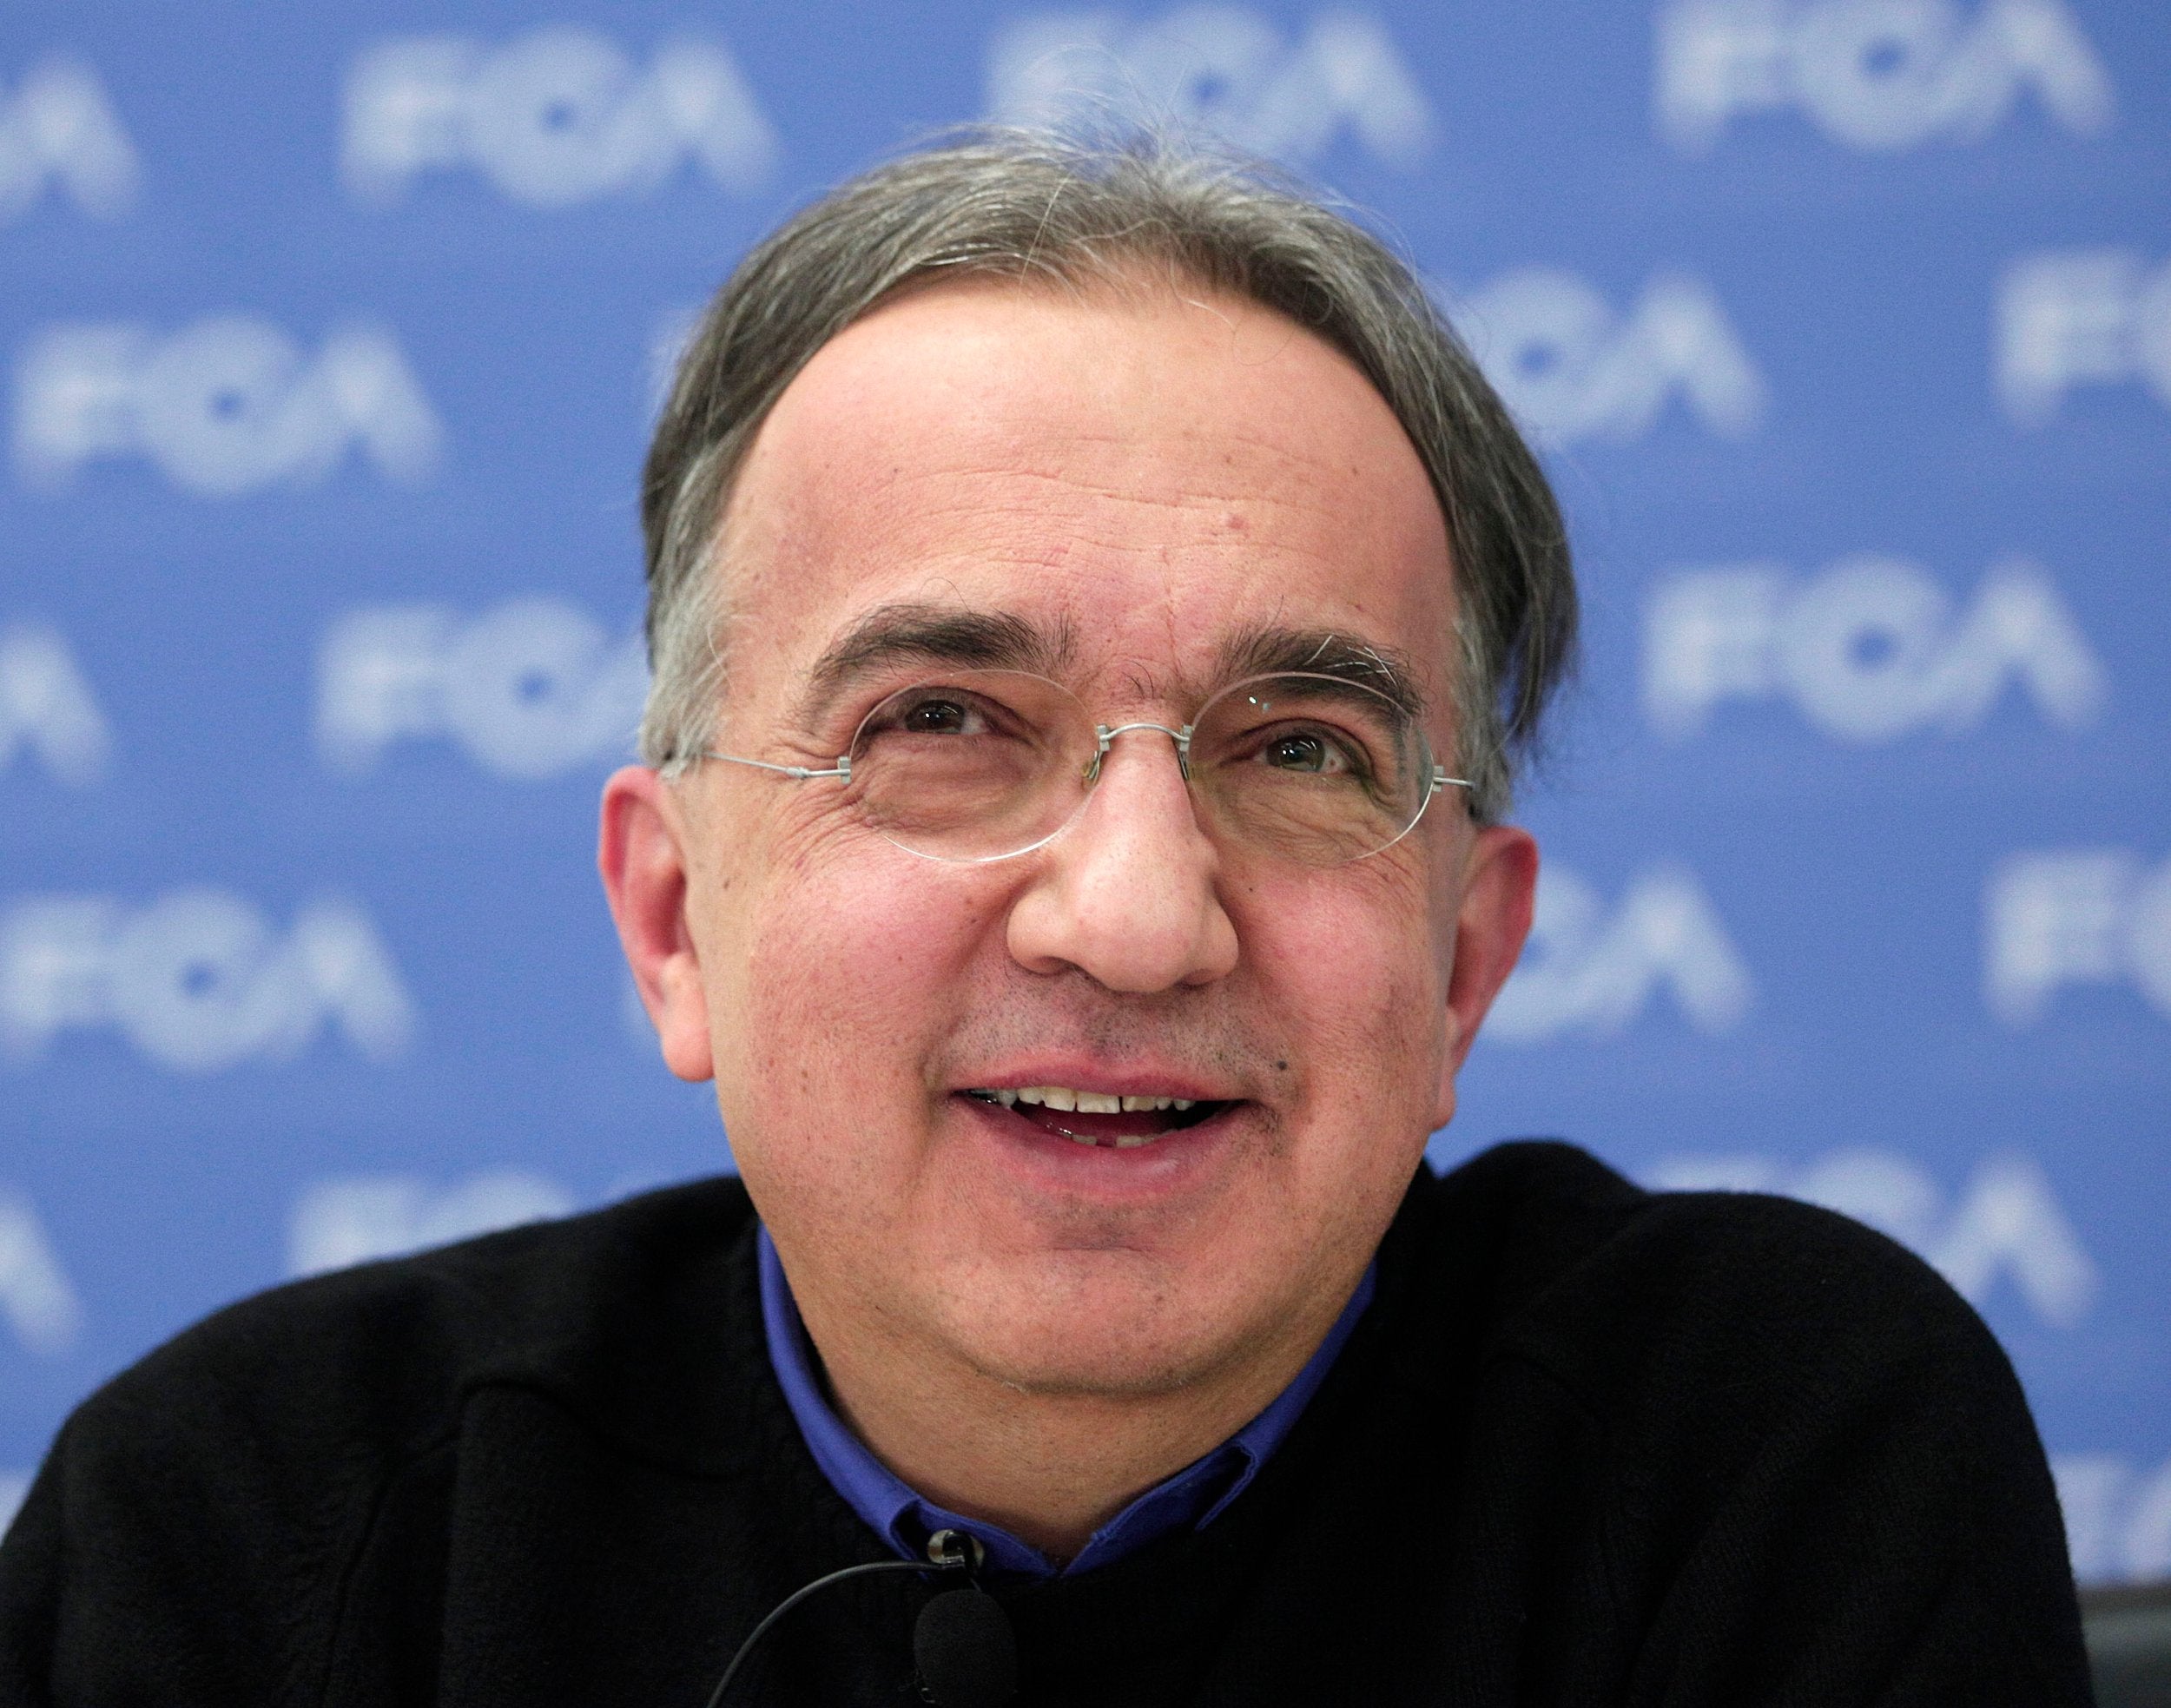 Exor, the holding company owned by Fiat's founding Agnelli family confirmed Mr Marchionne's death on Wednesday